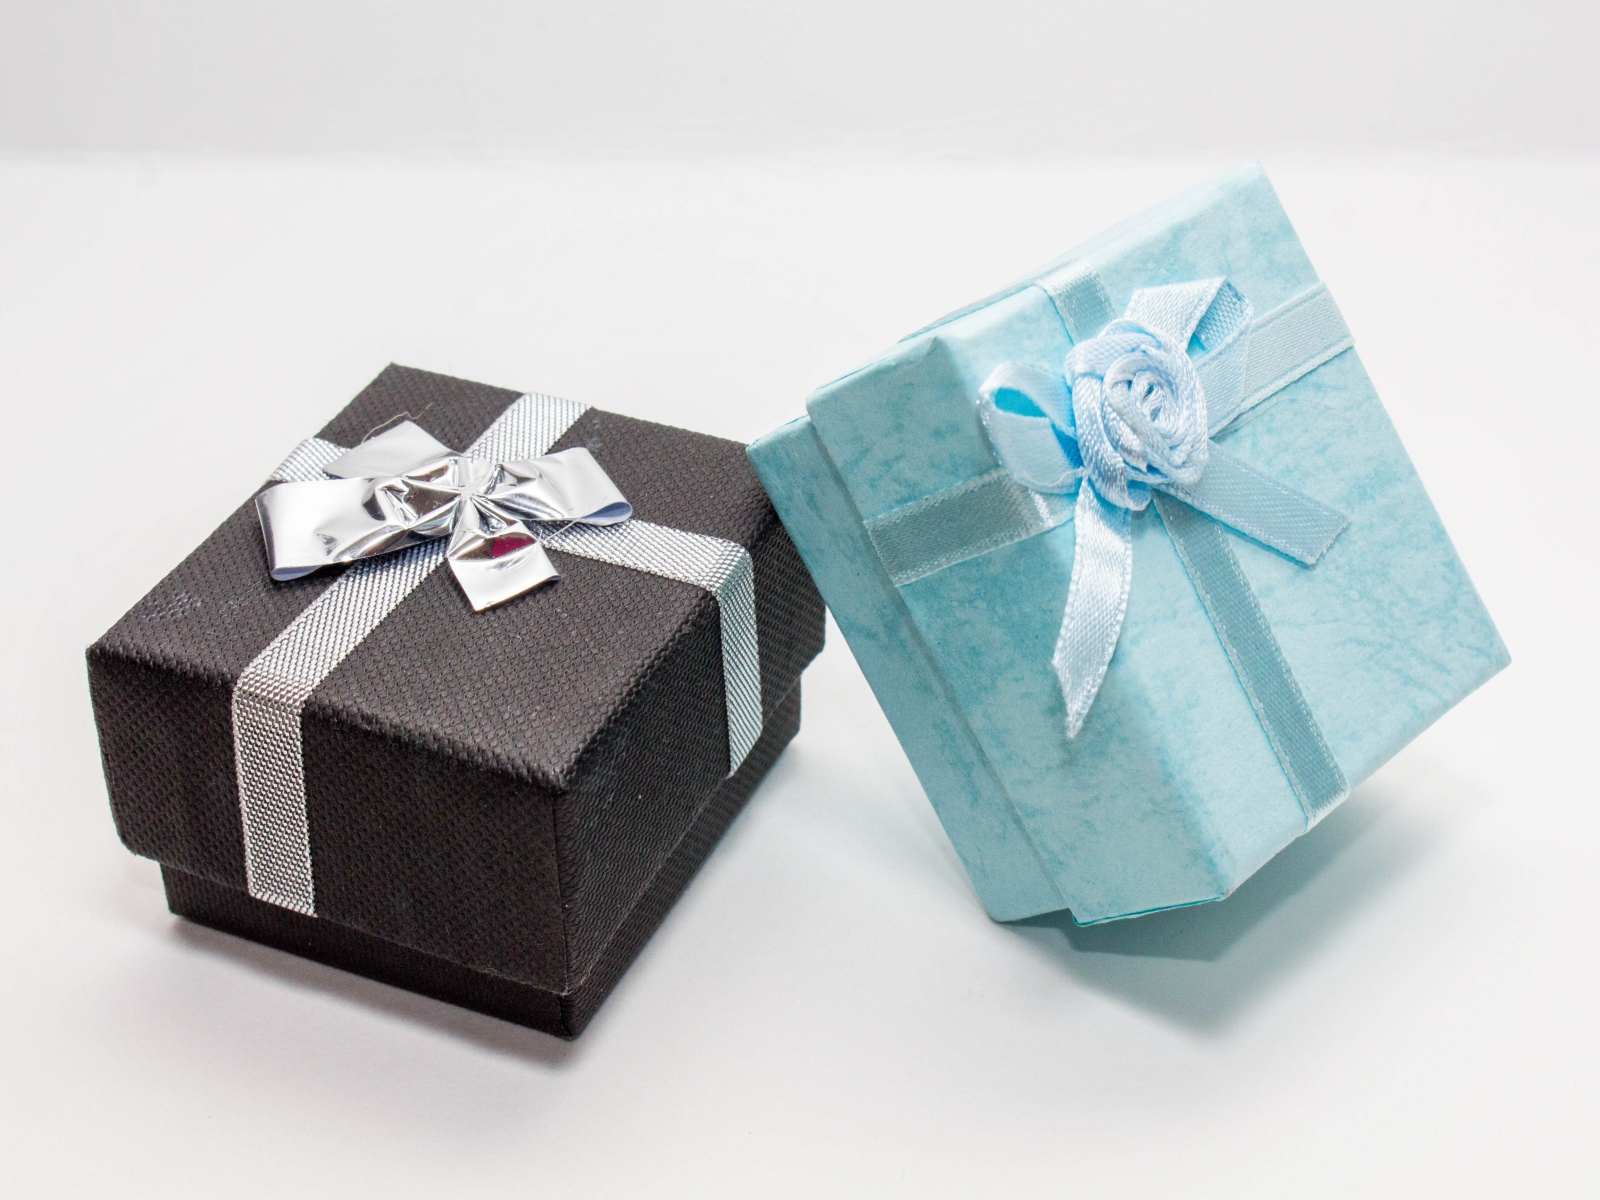 Two boxes with gifts on a gray background